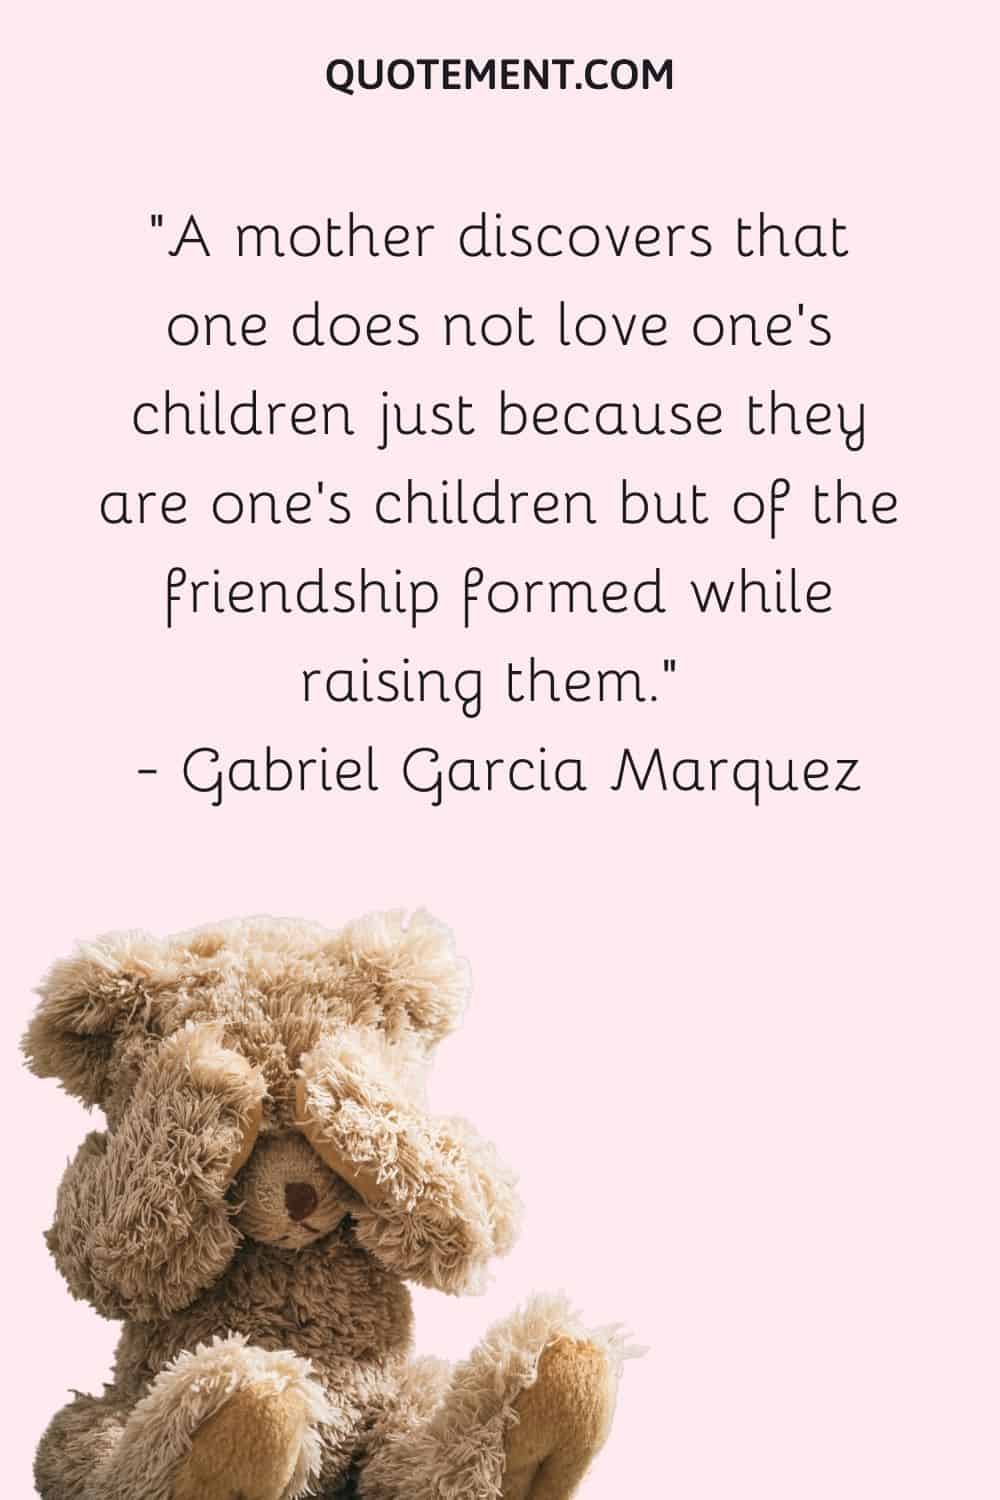 A mother discovers that one does not love one's children just because they are one's children but of the friendship formed while raising them. — Gabriel Garcia Marquez